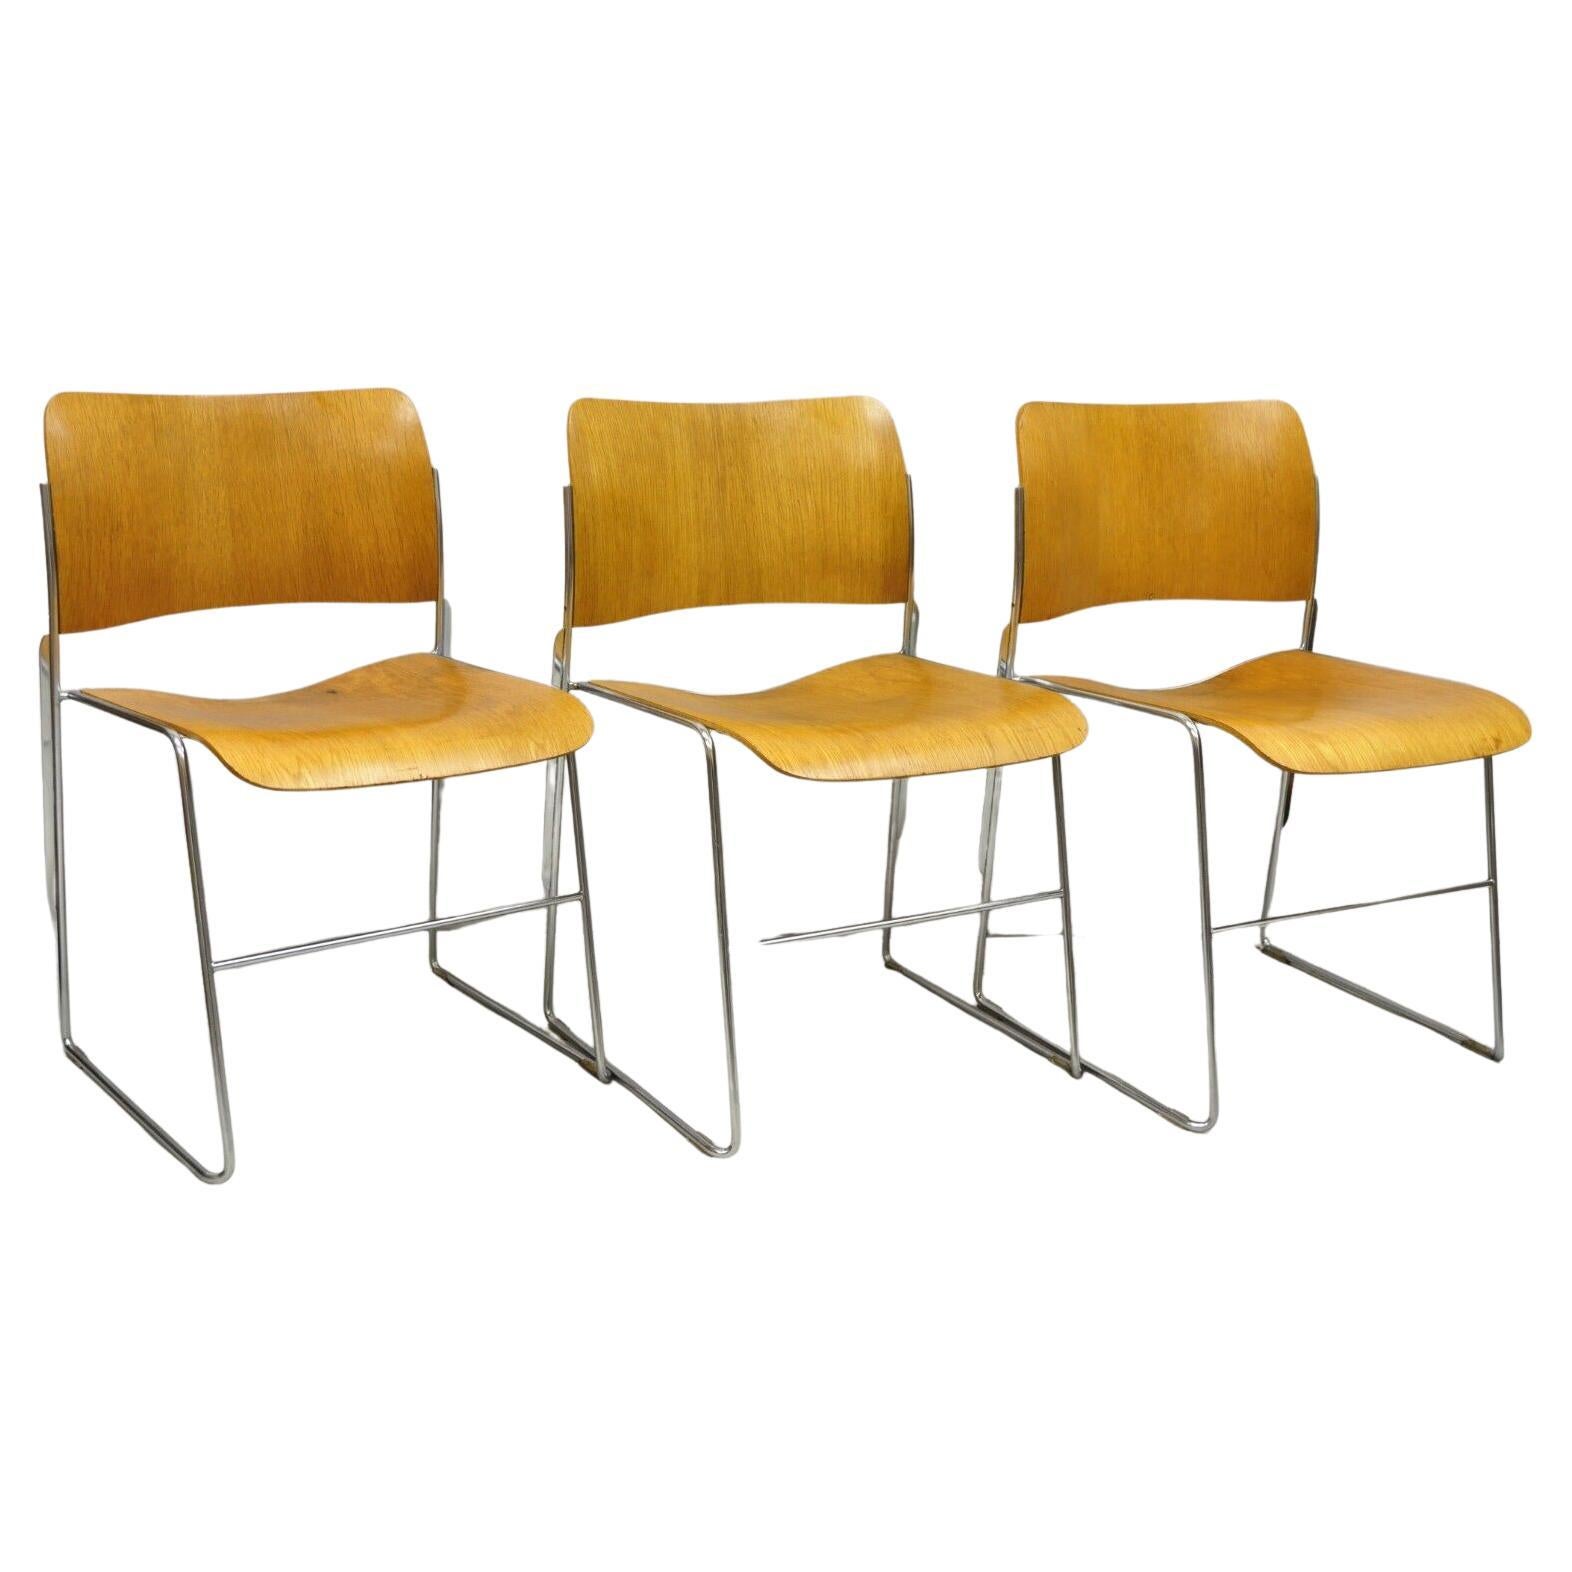 David Rowland 40/4 Bentwood Chrome Frame Stacking Side Chairs, Set of 3 For Sale